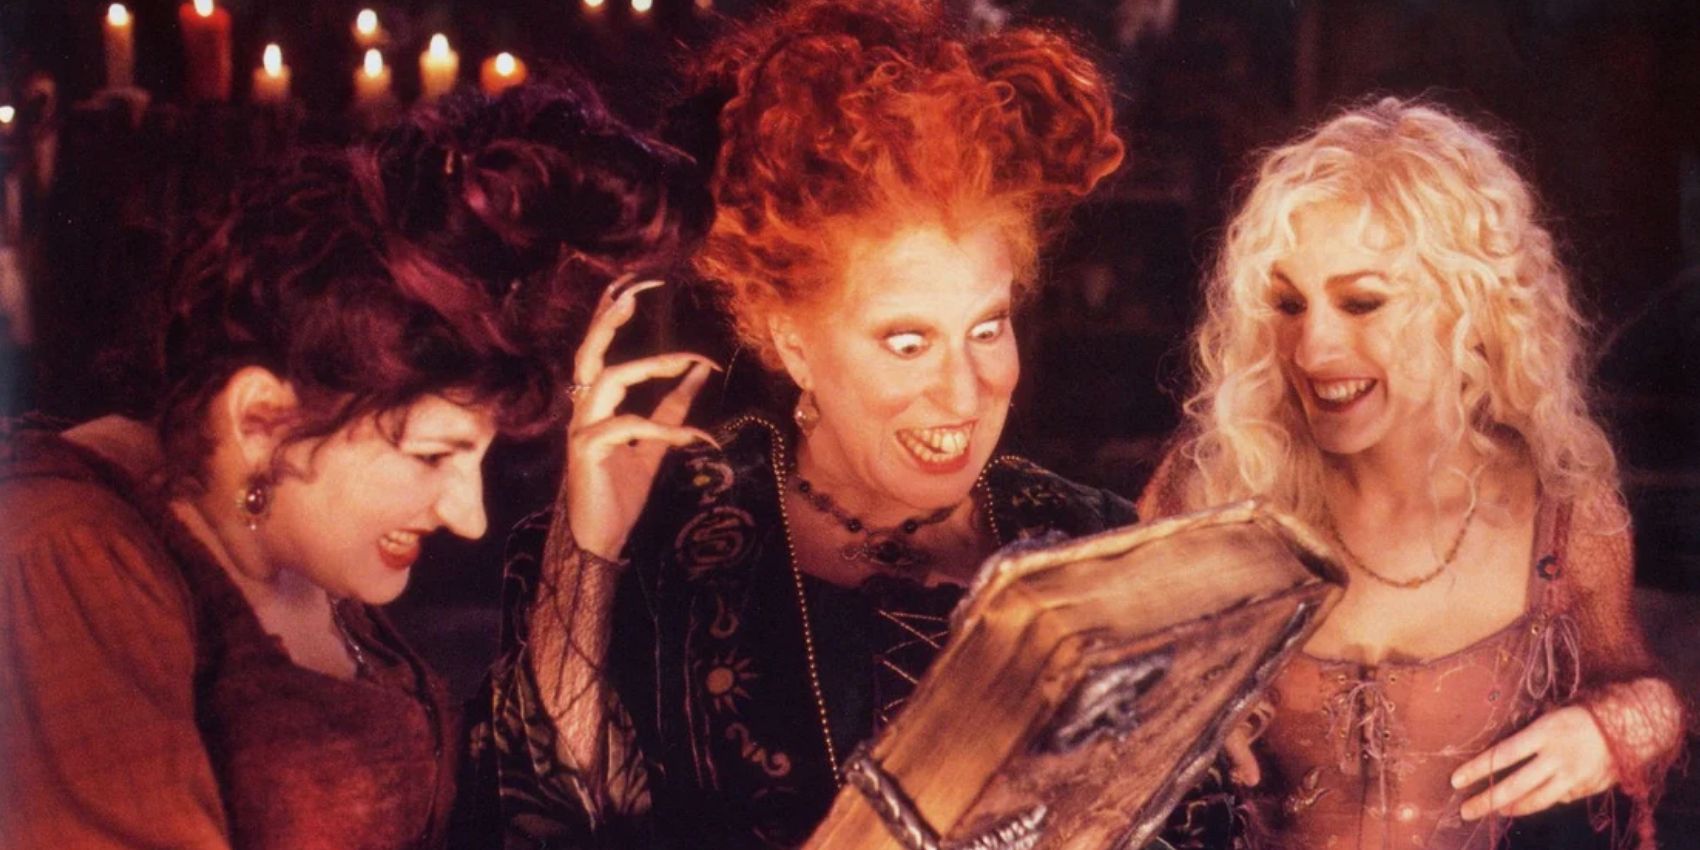 The Sanderson Sisters with the spellbook in Hocus Pocus